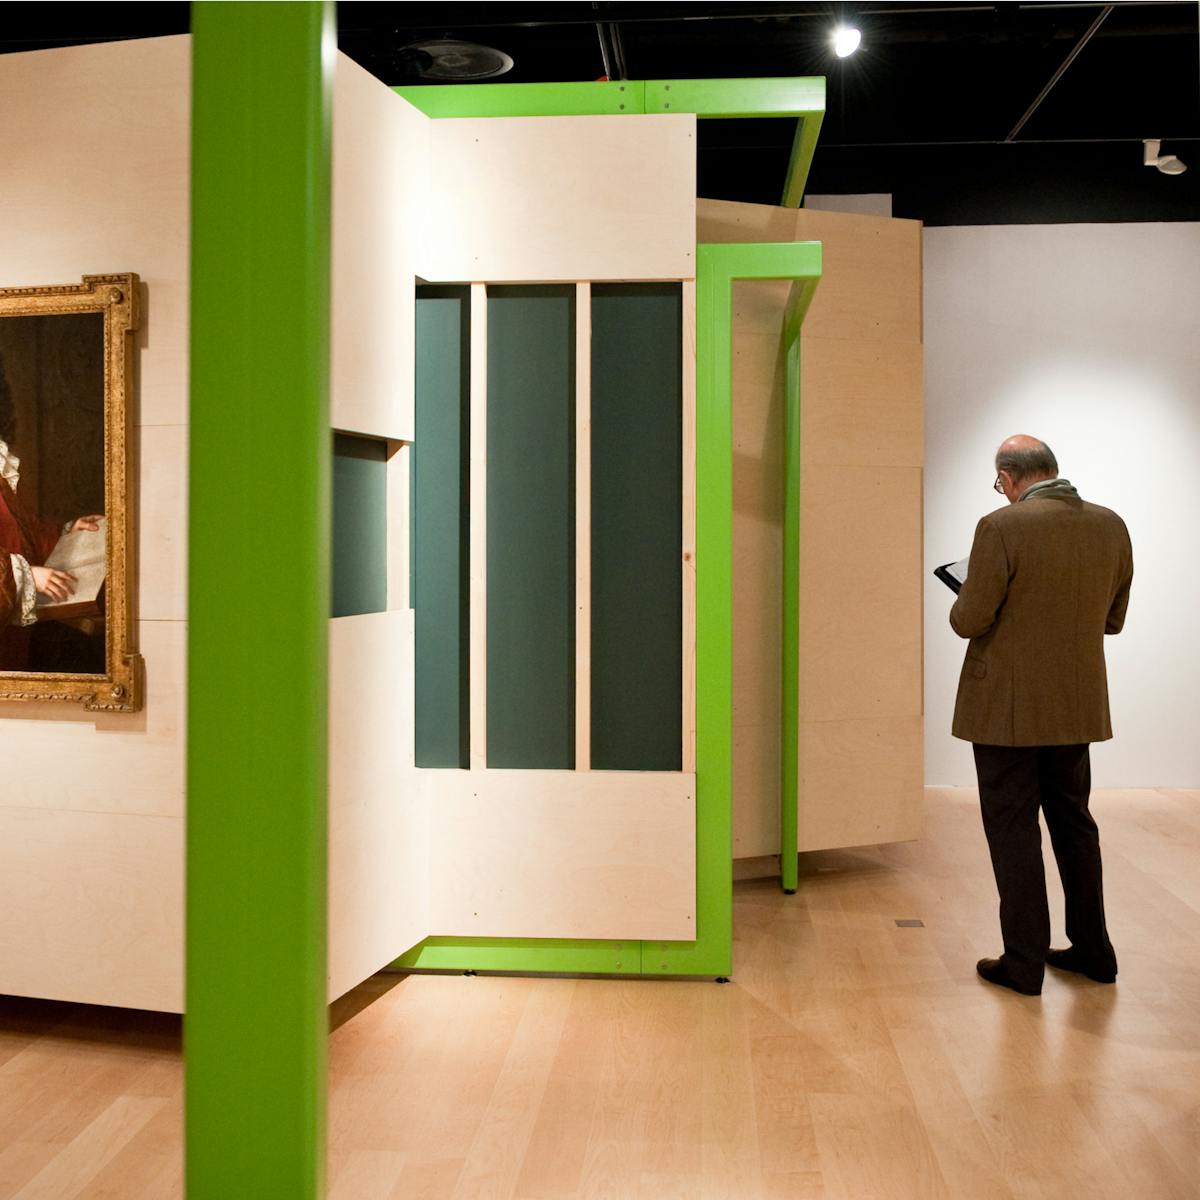 Photograph of a visitor exploring the Identity exhibition at Wellcome Collection.